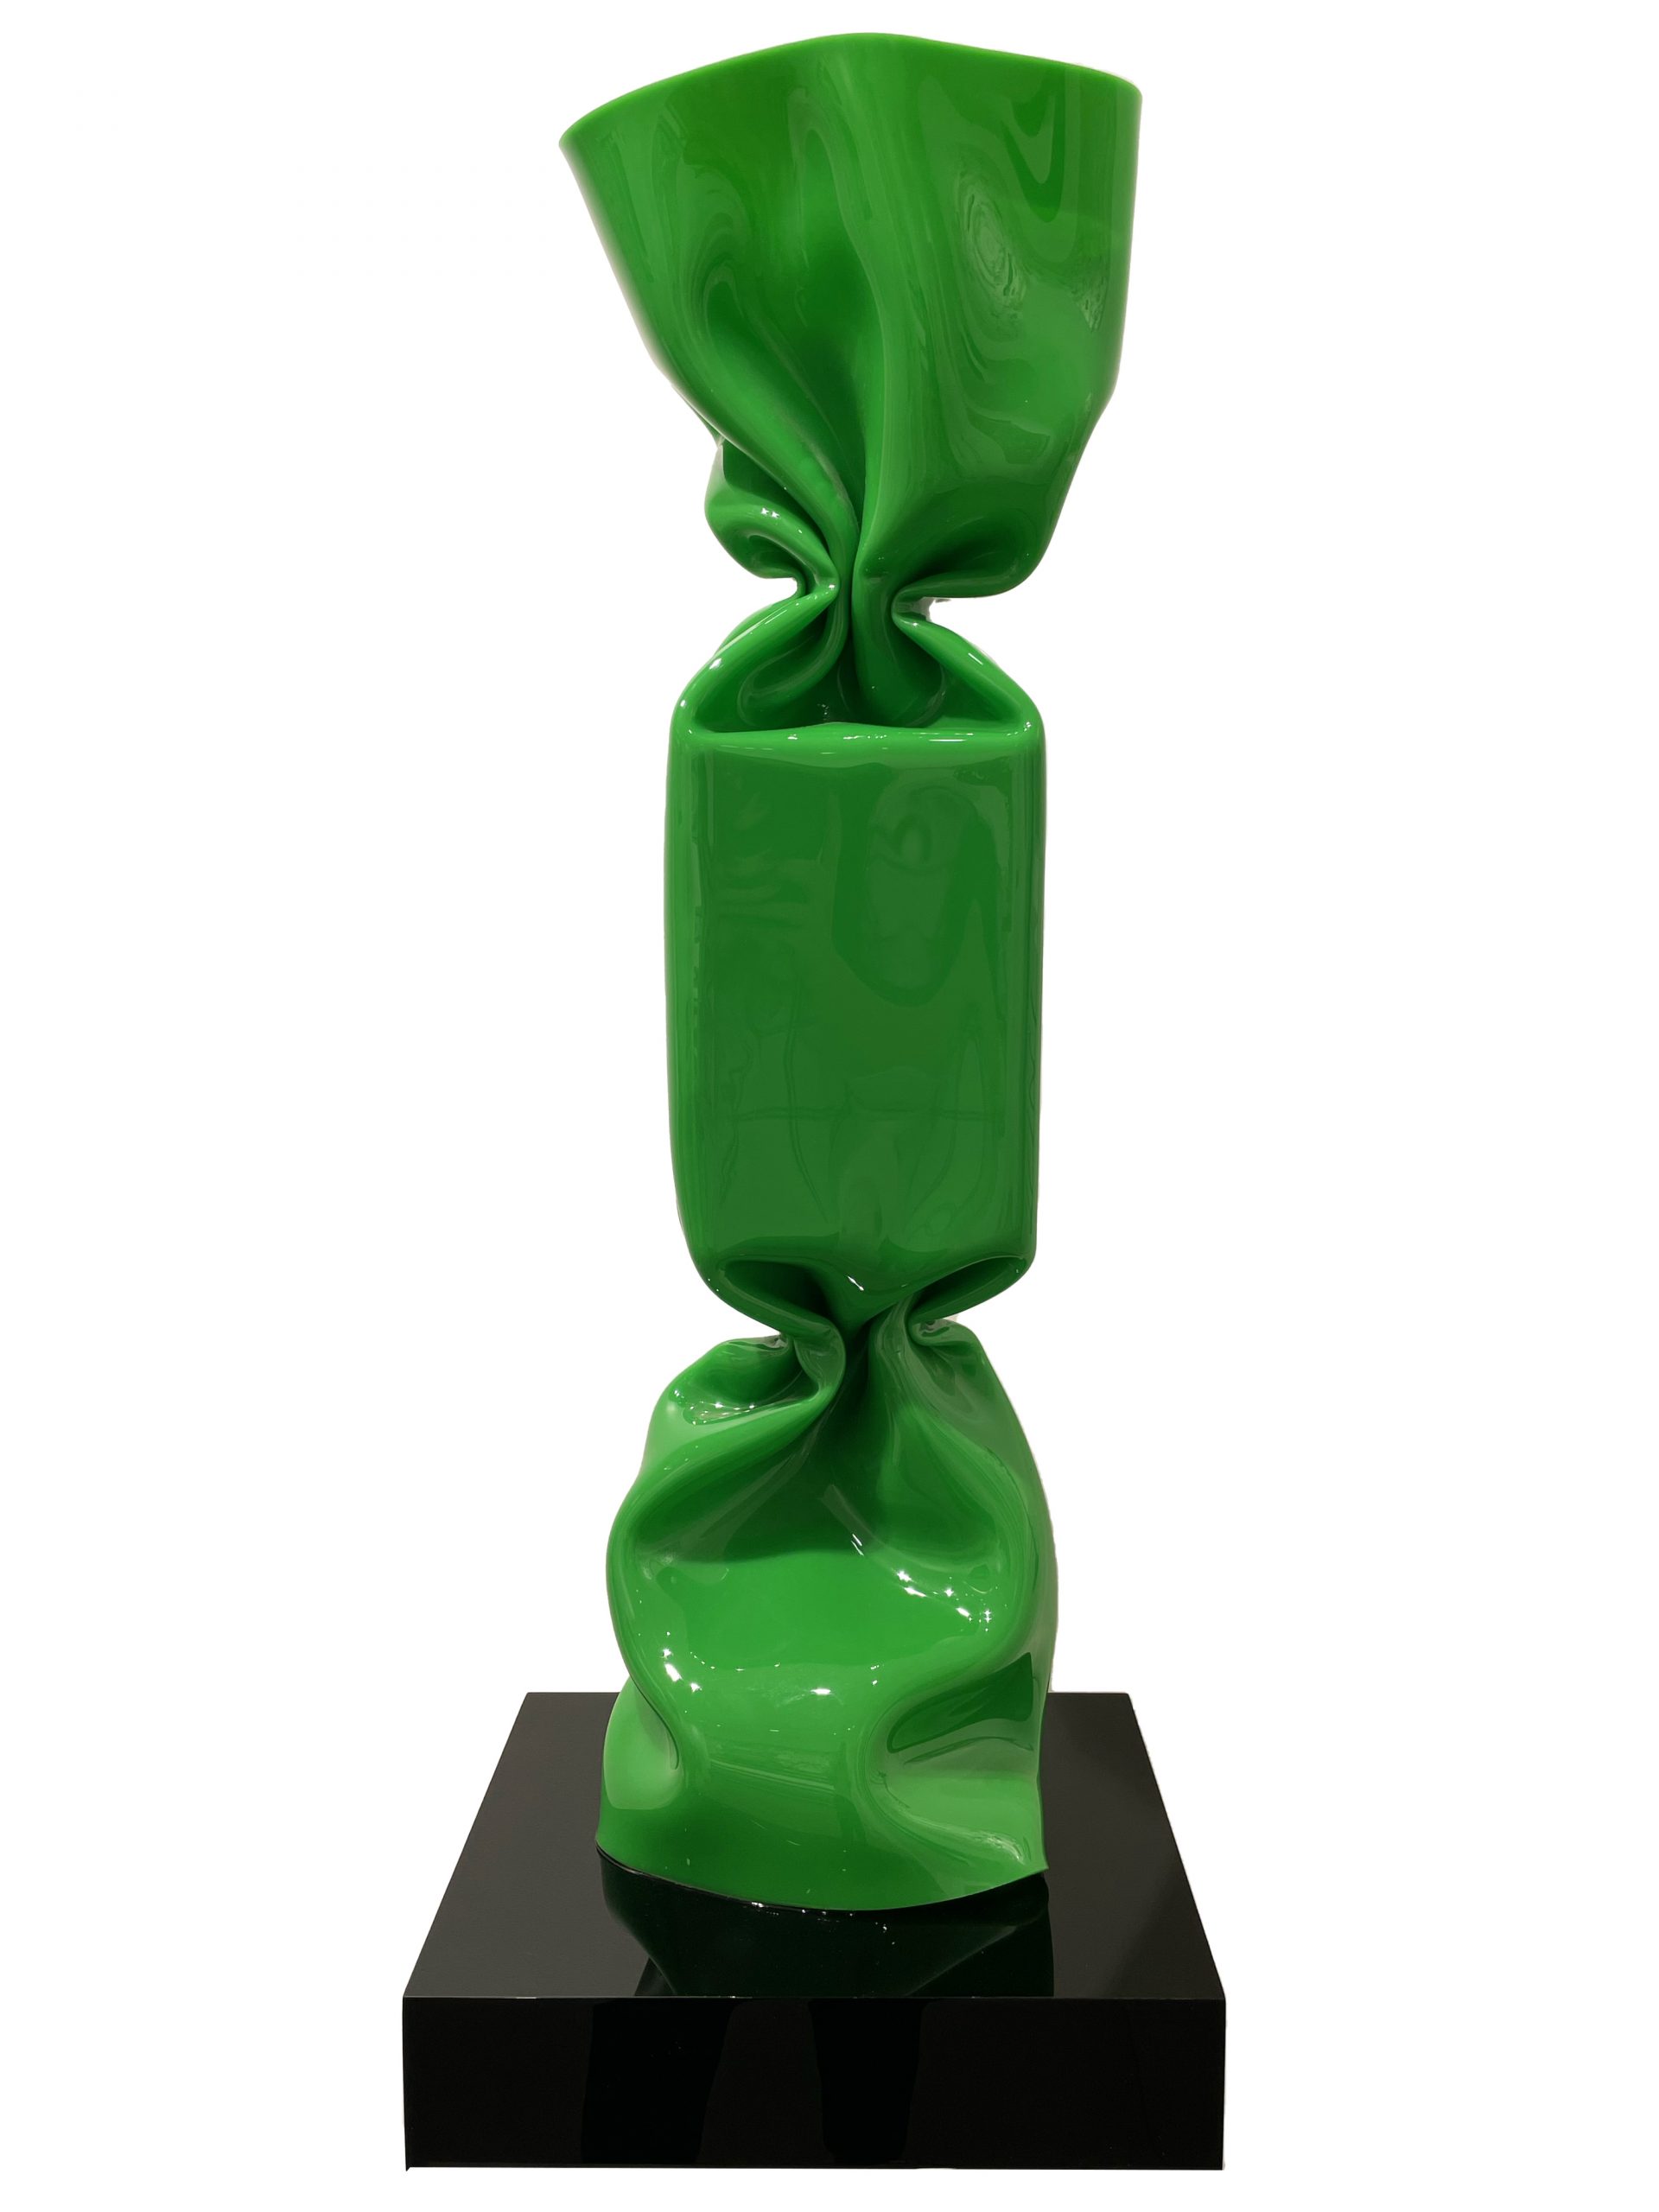 Laurence Jenk Artiste  Wrapping Bonbon Vert  © Marciano Contemporary